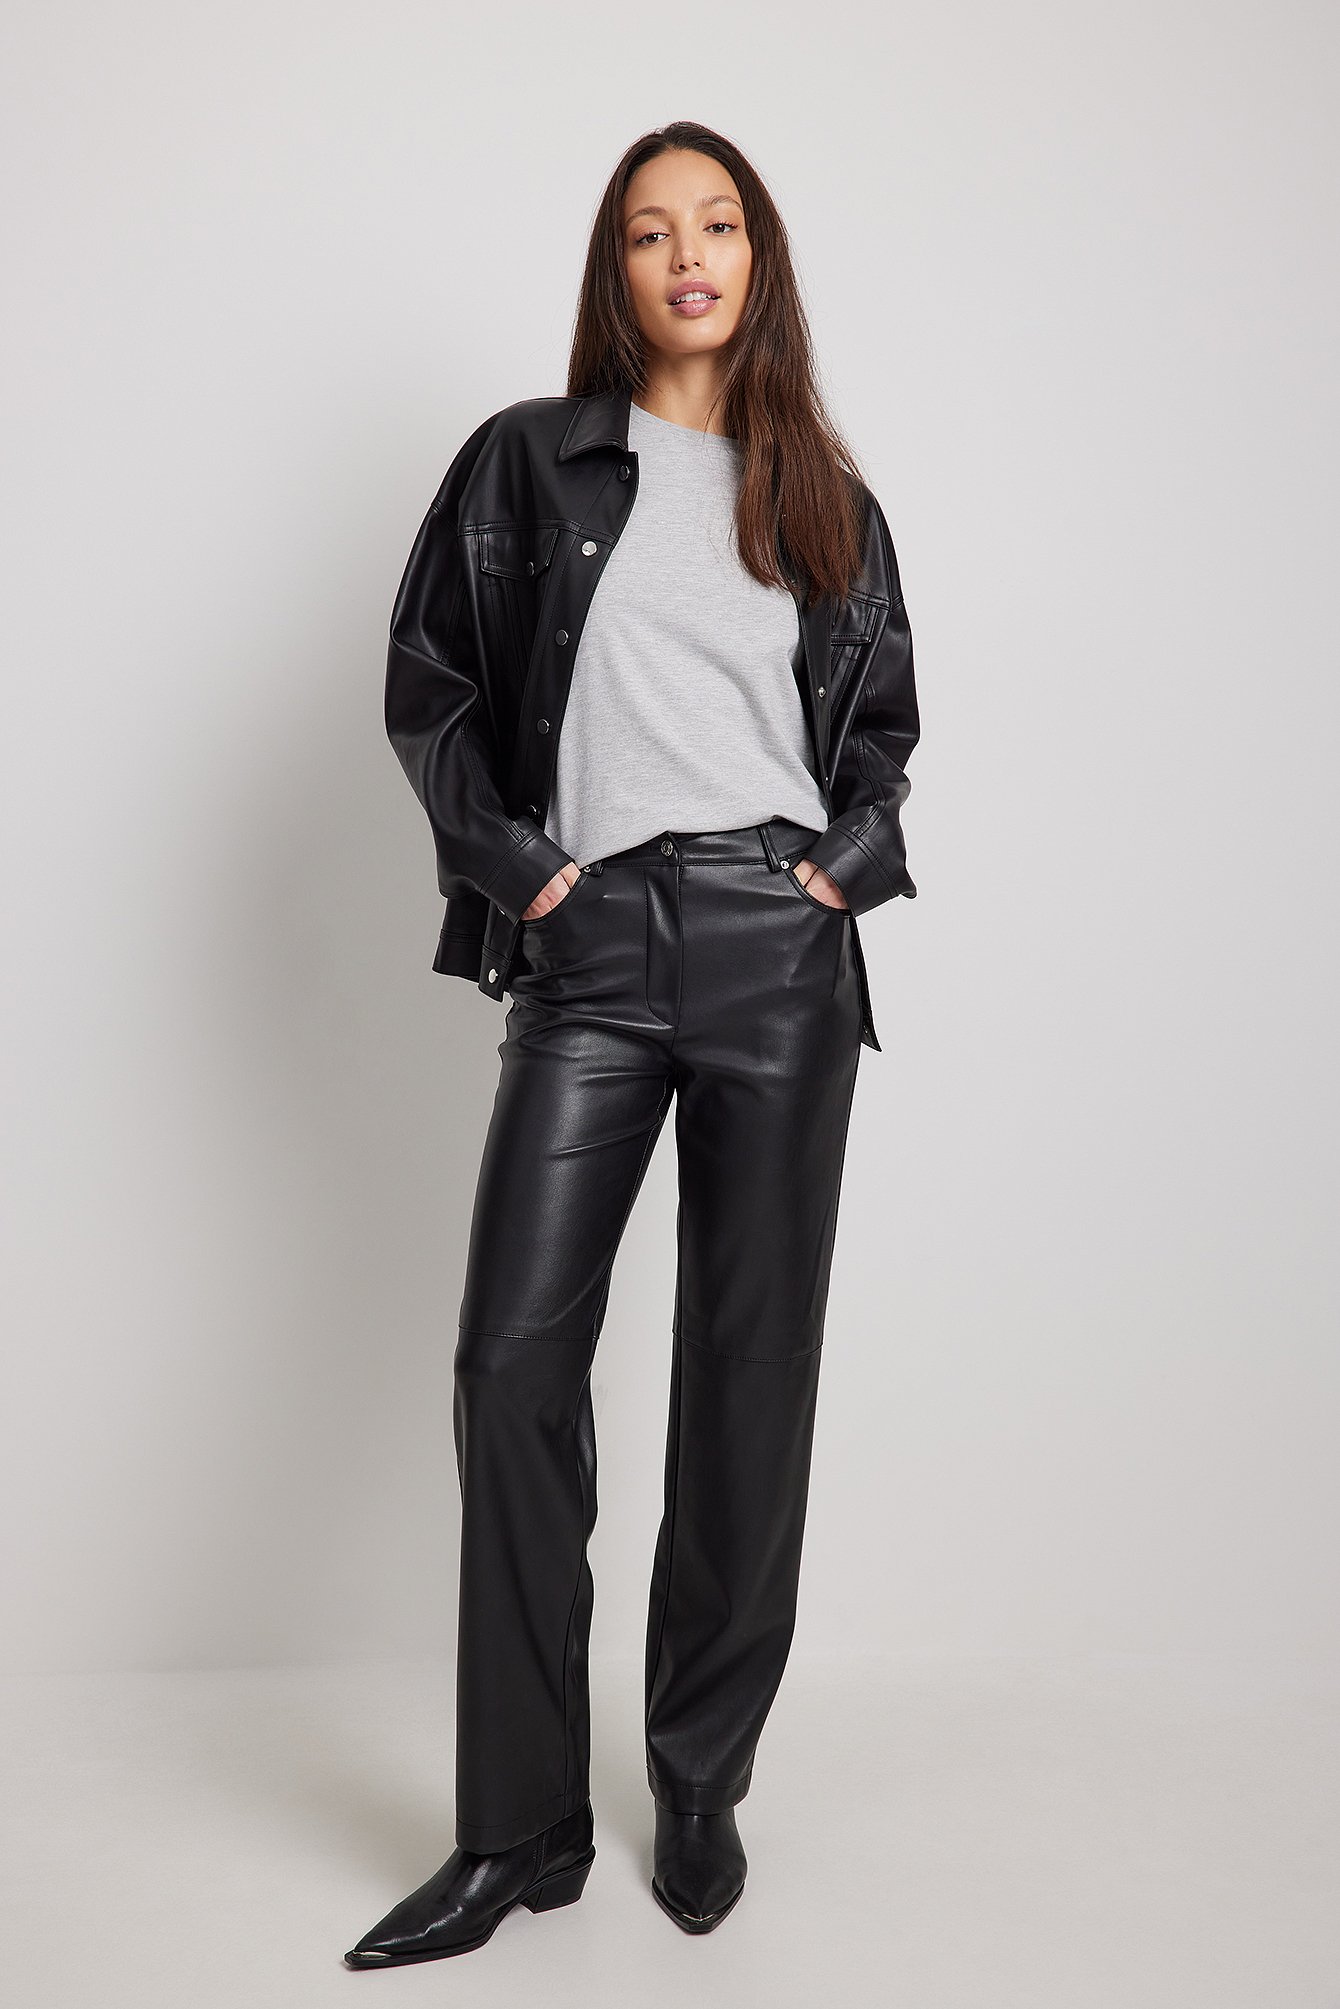 High Waist Straight Leather Trousers For Women Zipper Pu Leather Pants Ol  Ladies Black Brown White Anklelength Pant  Fruugo IN